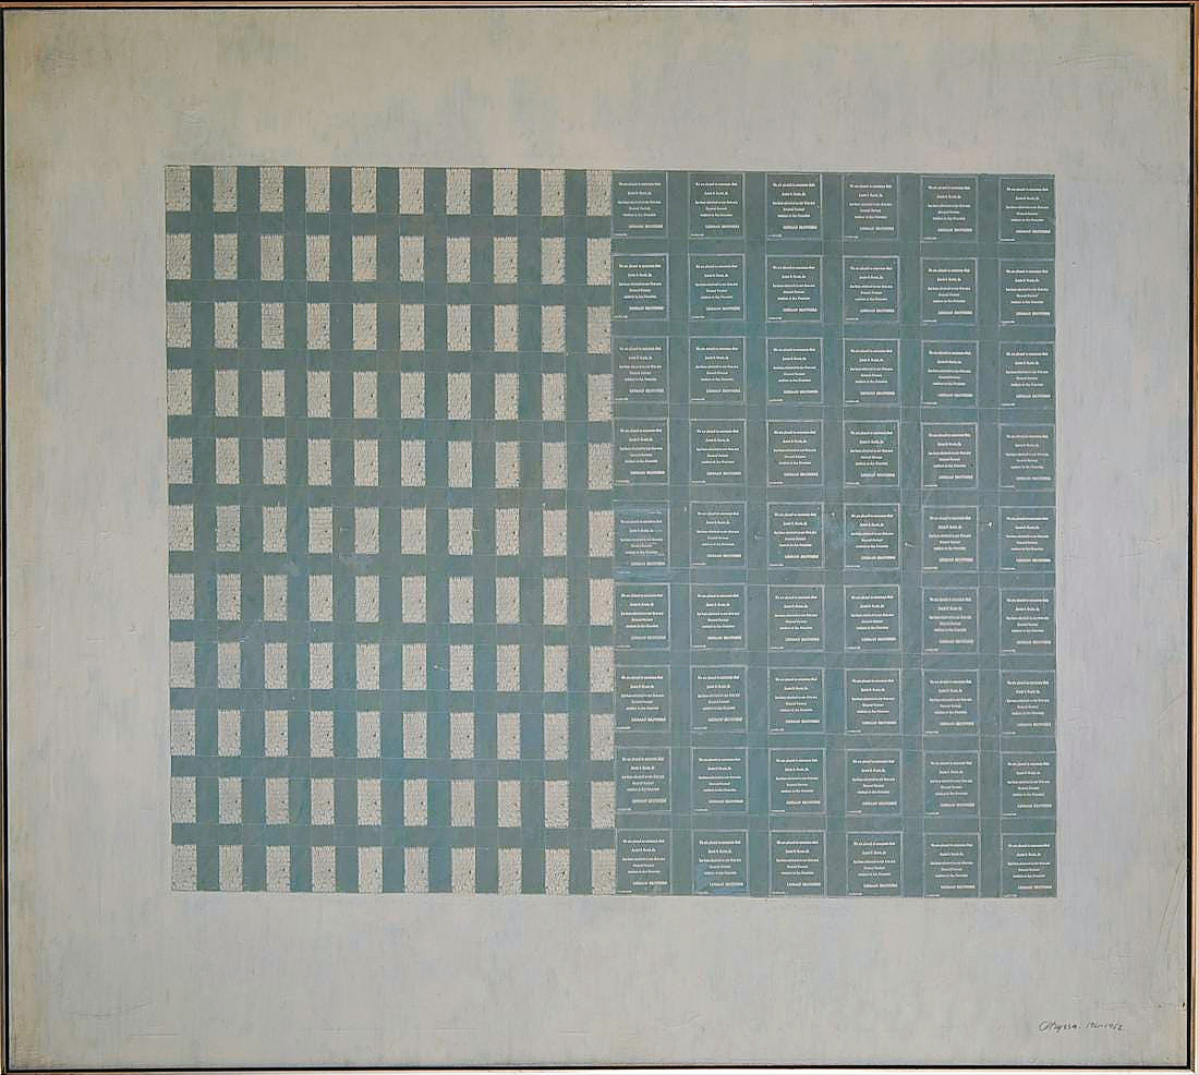 The Chryssa Vardea oil on canvas, “Stocks (Lehman Brothers),” 1962, was of large scale (69 by 75 inches) and commanded $41,250.